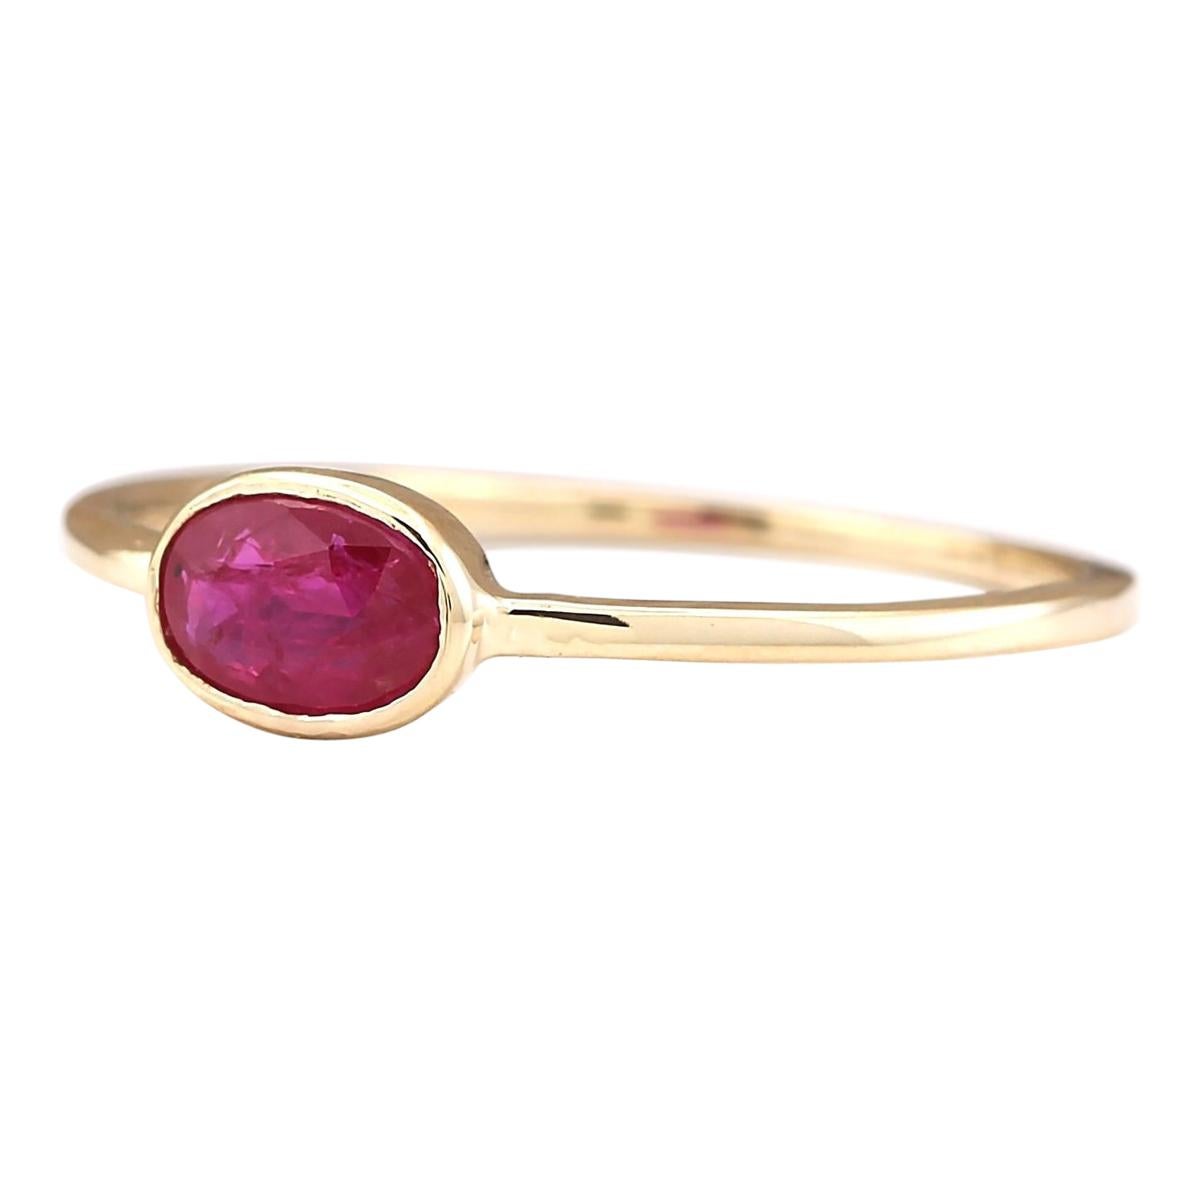 Stamped: 14K Yellow Gold
Total Ring Weight: 1.0 Grams
Total Natural Ruby Weight is 0.60 Carat
Color: Red
Face Measures: 6.00x4.00 mm
Sku: [703212W]